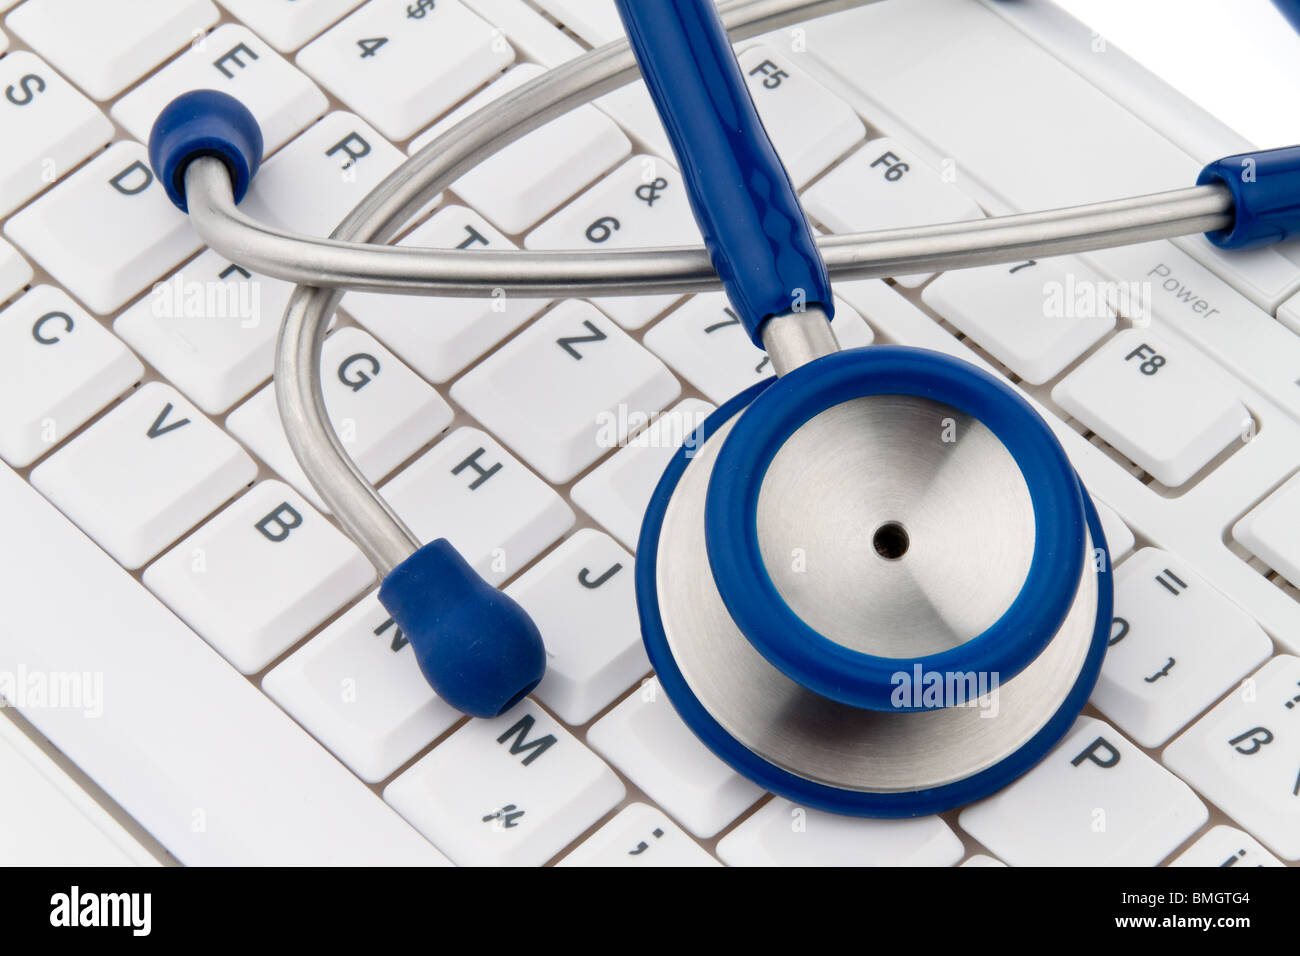 A computer keyboard and stethoscope. IT for physicians. Stock Photo